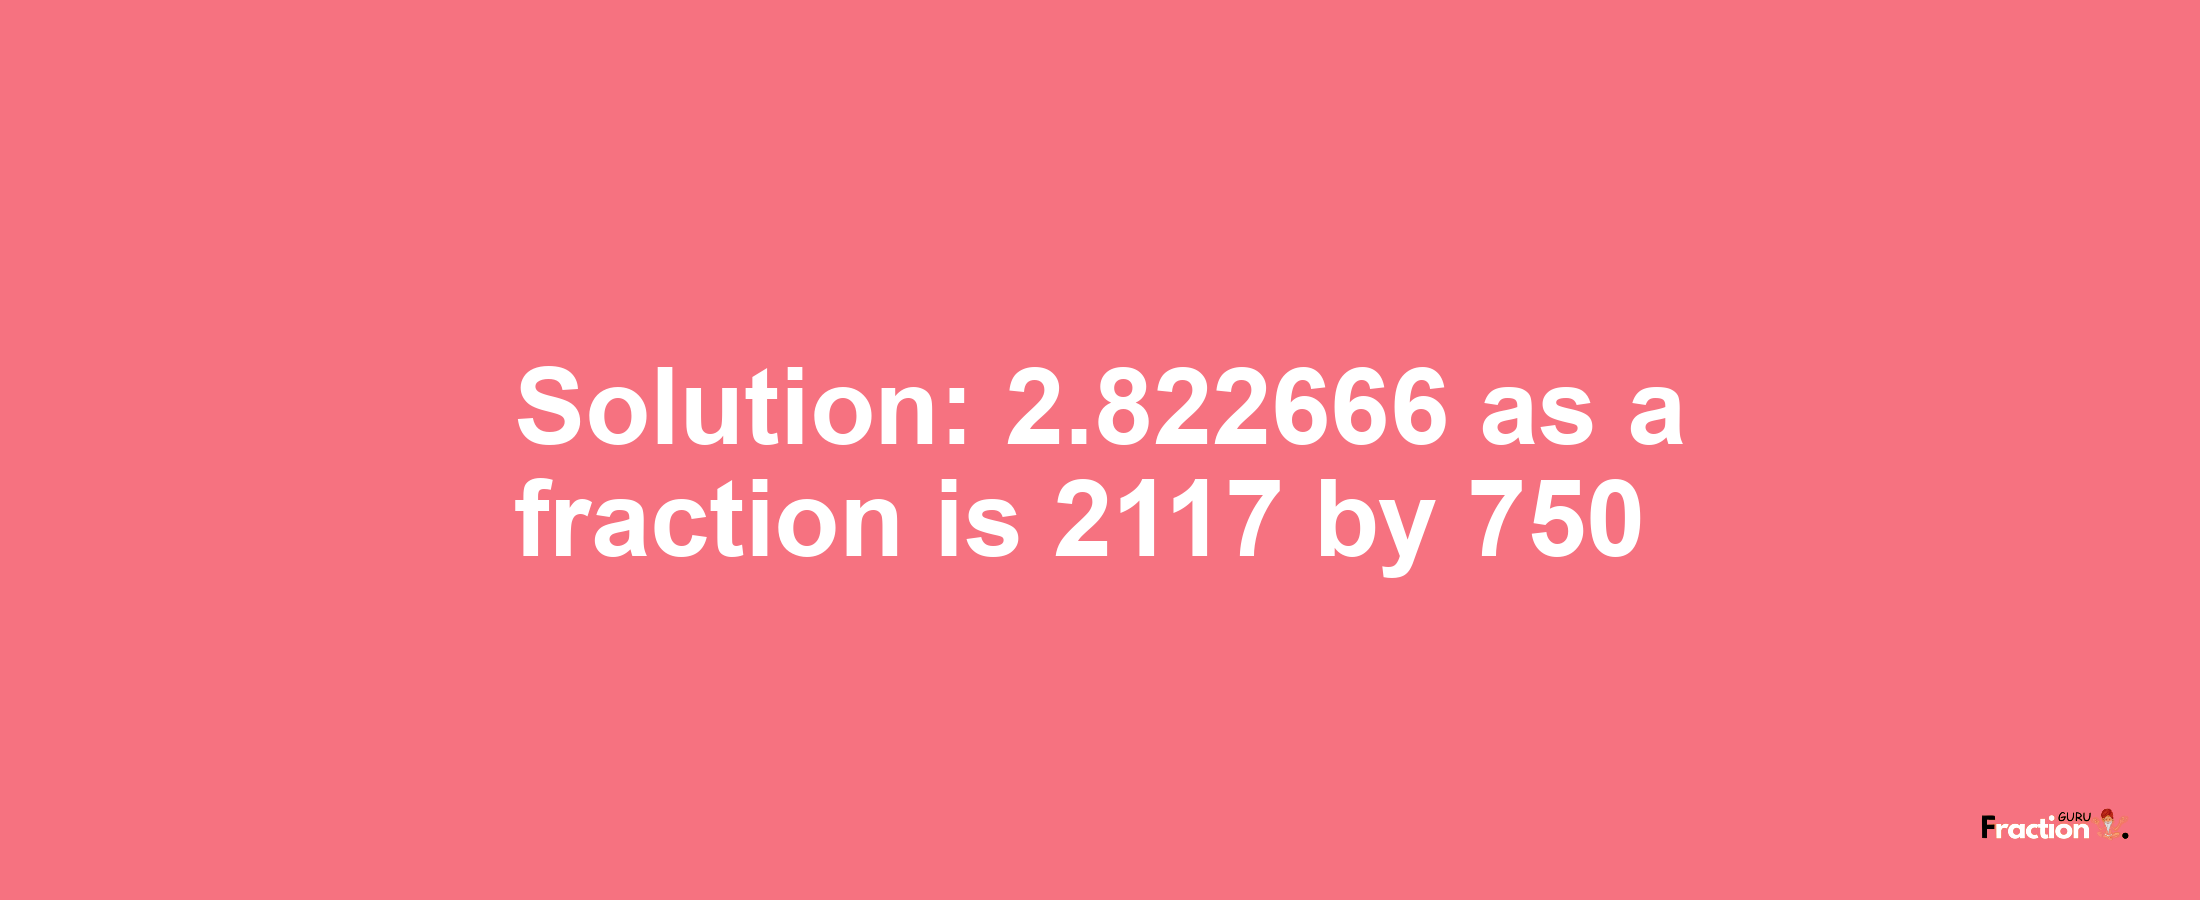 Solution:2.822666 as a fraction is 2117/750